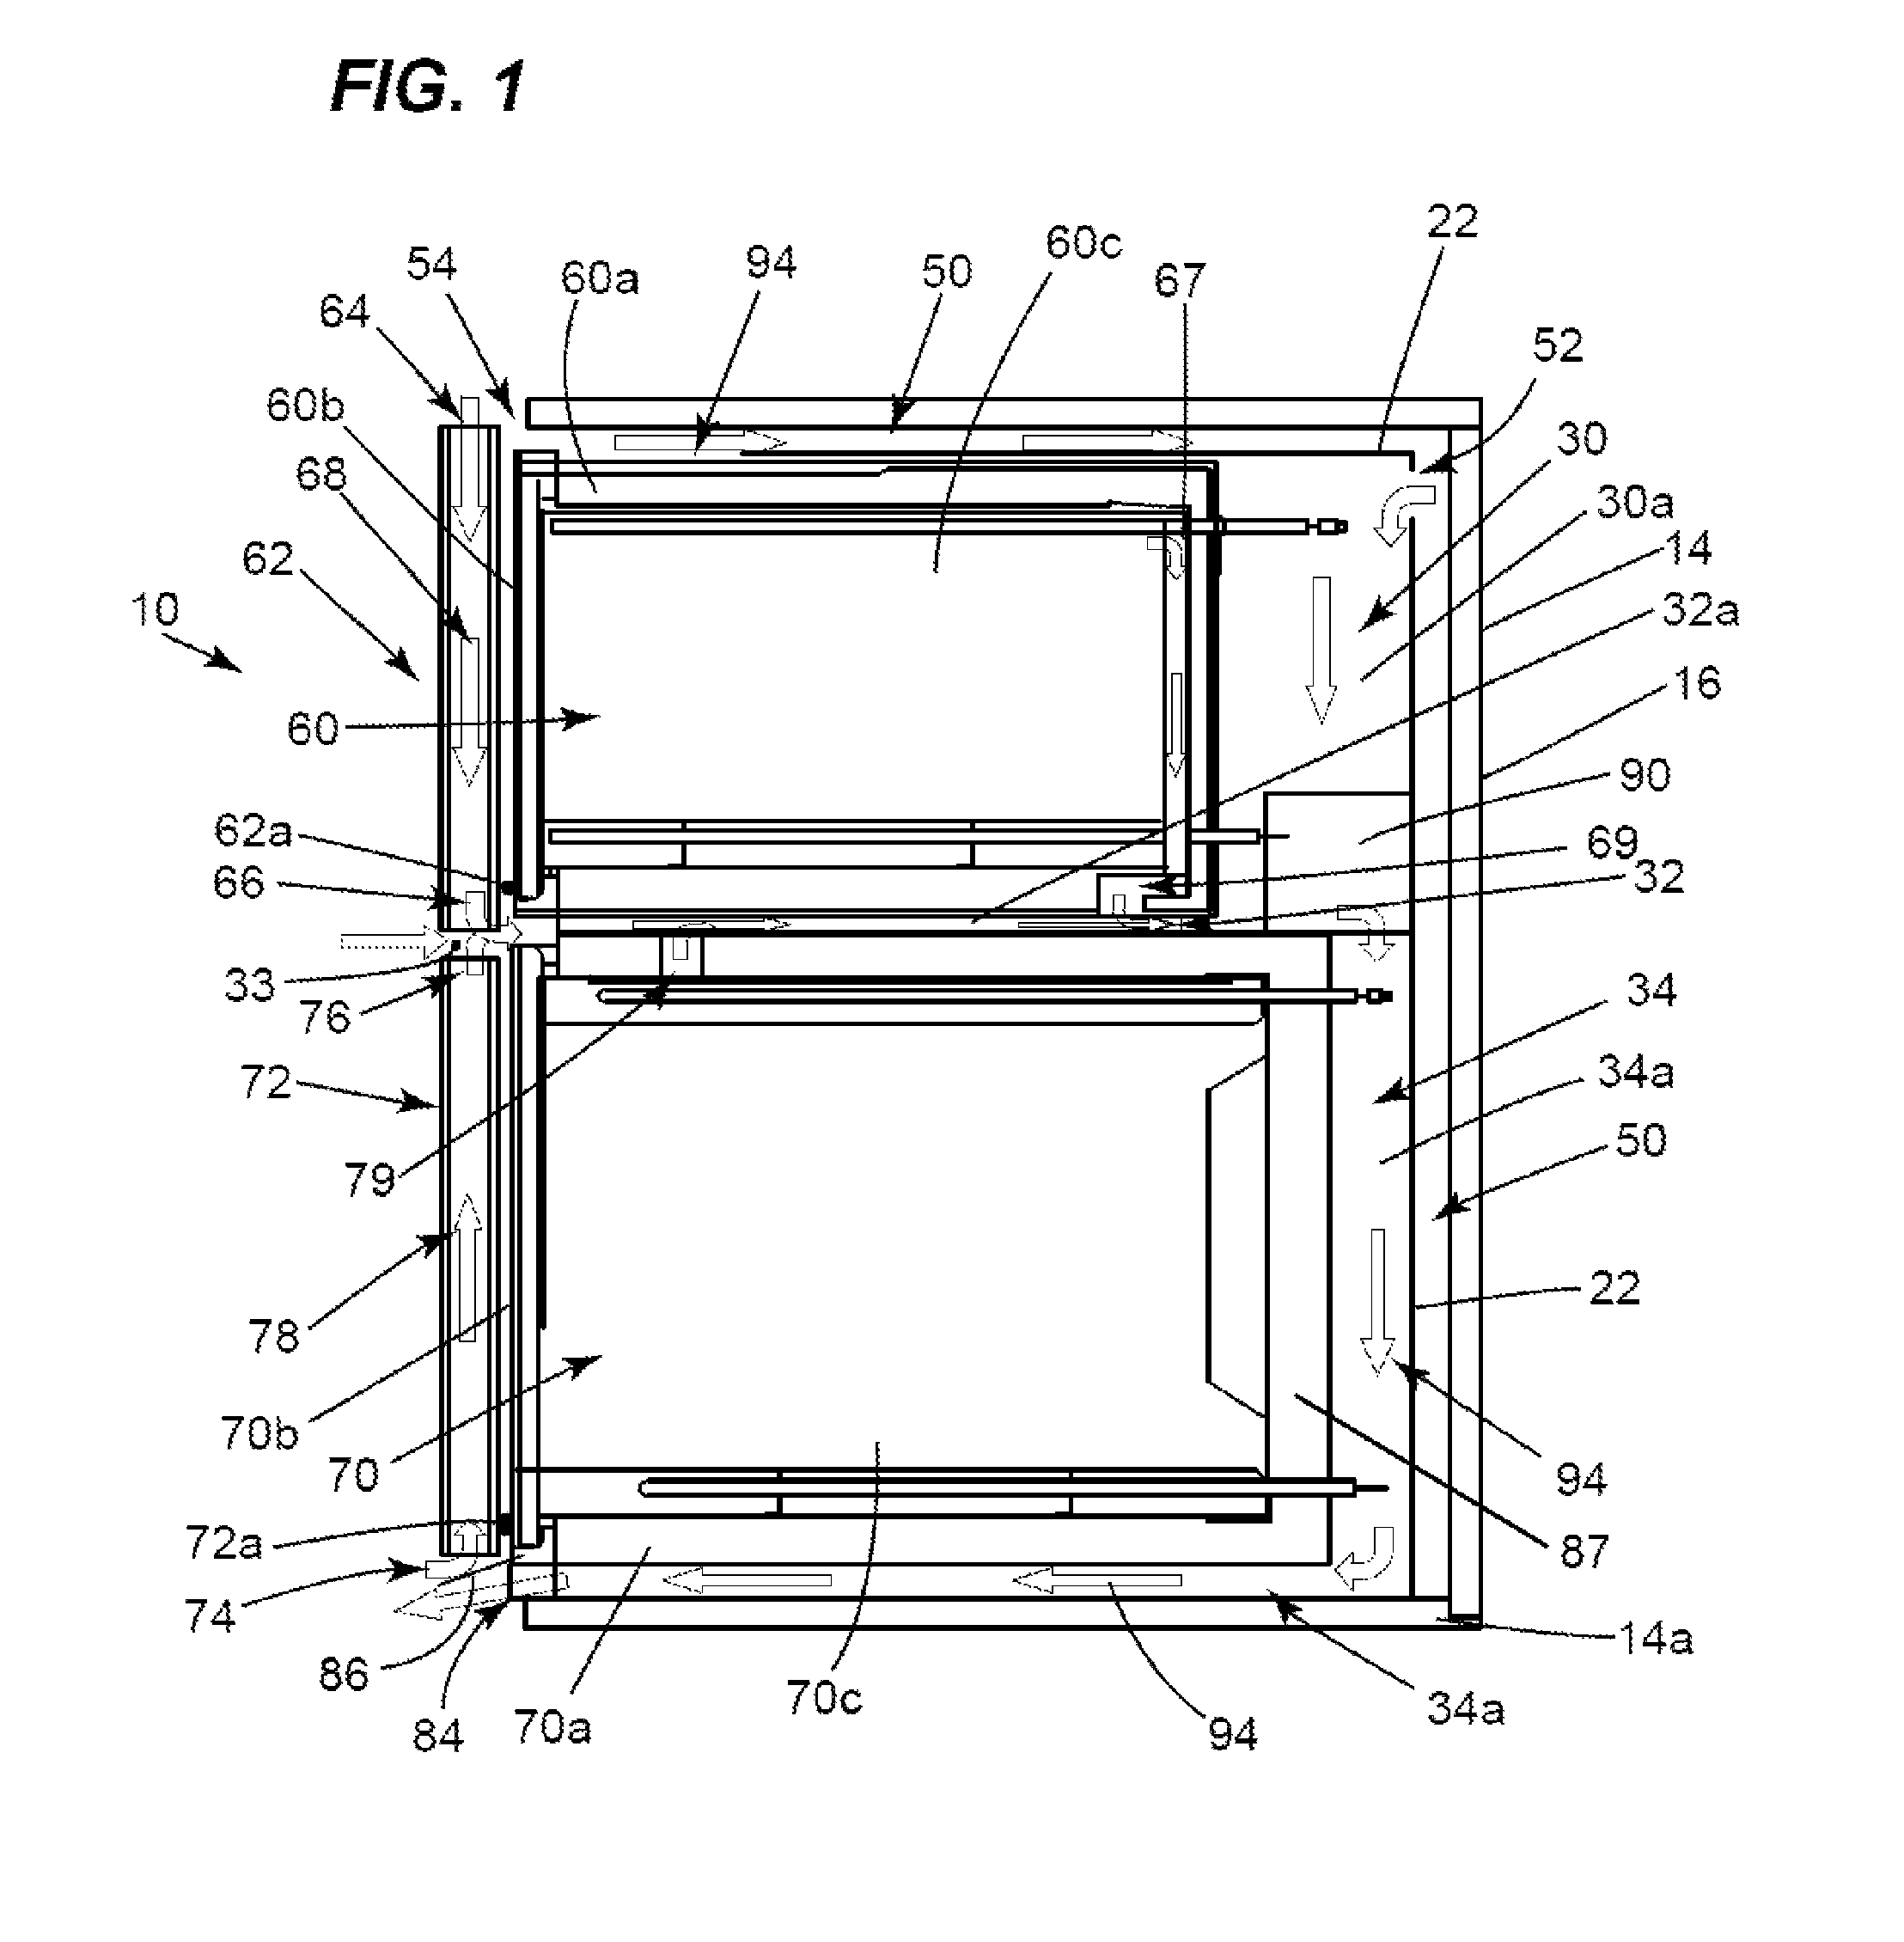 Appliance with a vacuum-based reverse airflow cooling system using one fan